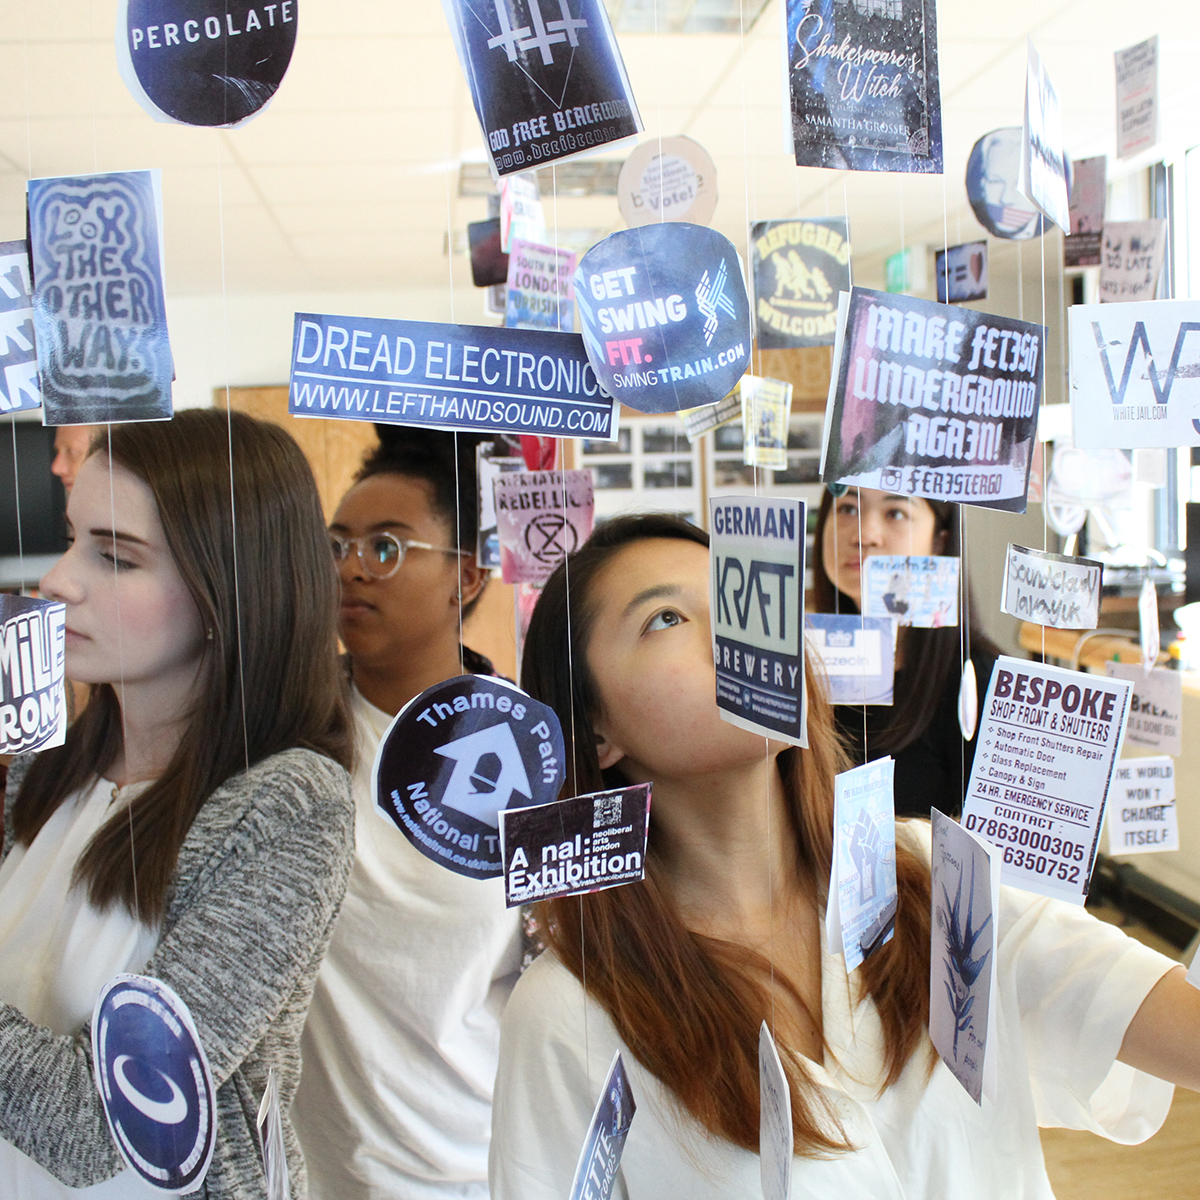 Students standing among signage and stickers hanging from the ceiling by strings